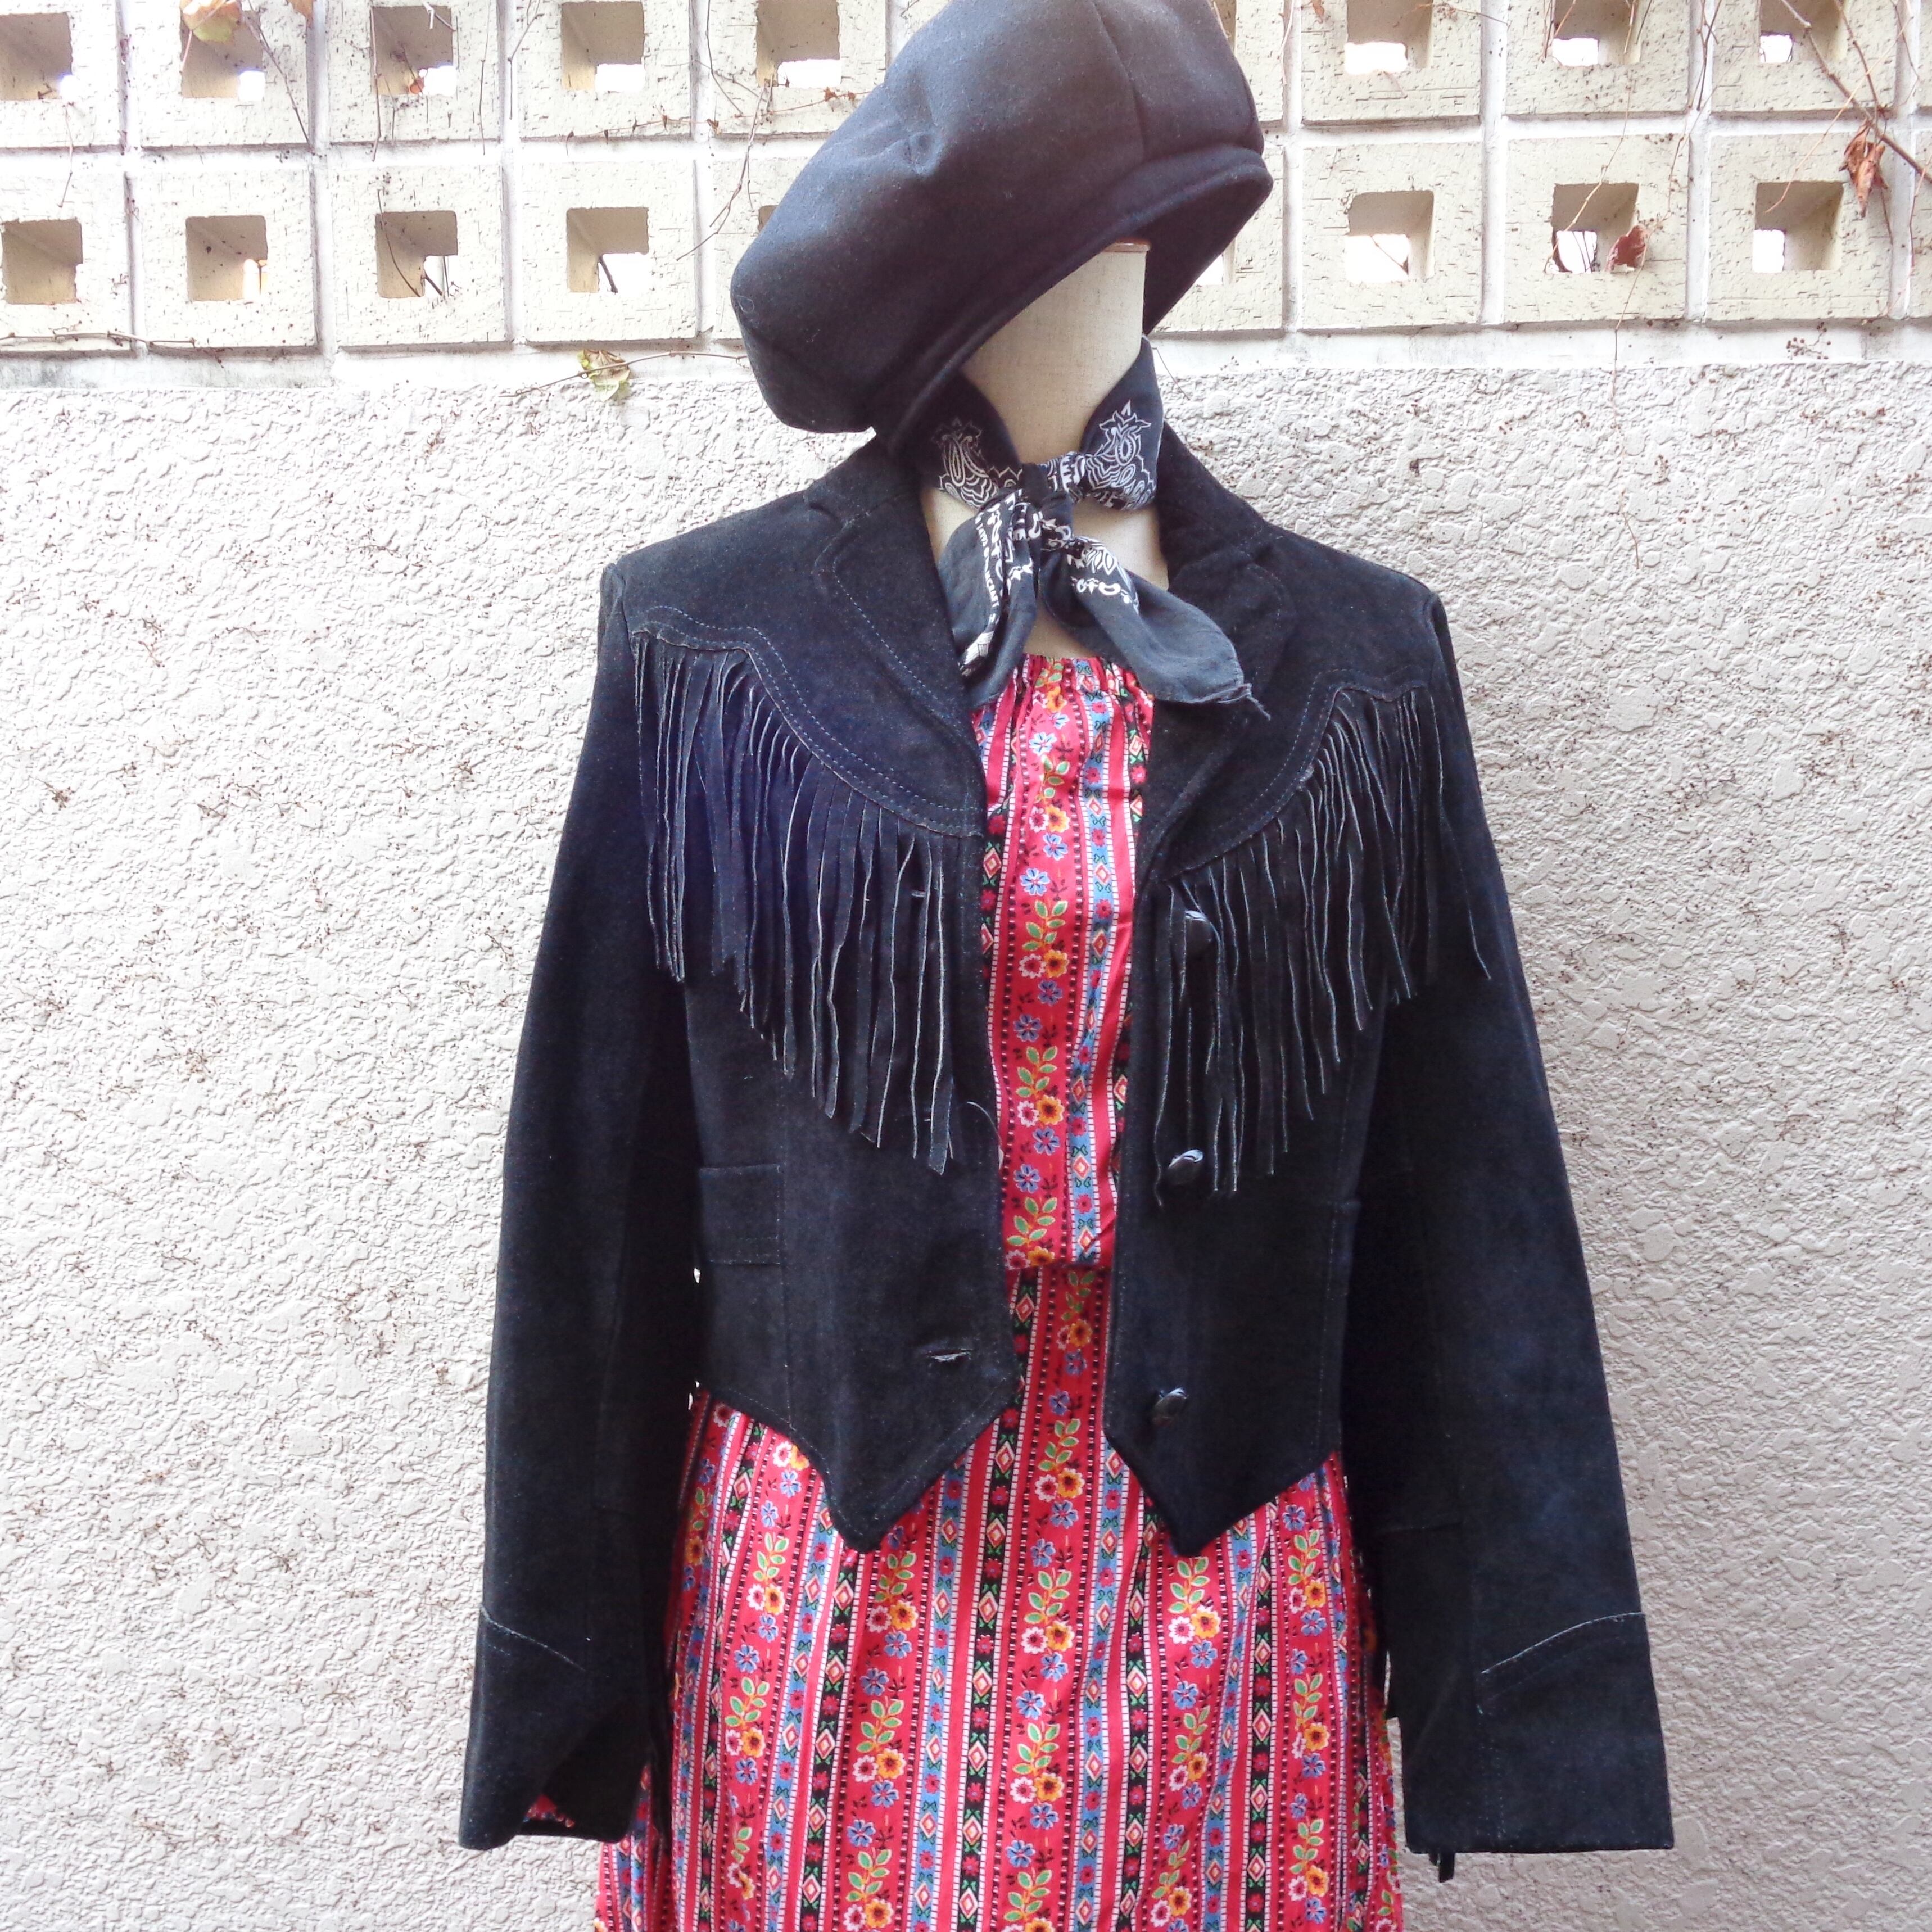 Suede leather fringe jacket／スエード レザー フリンジ ジャケット | BIG TIME ｜ヴィンテージ 古着  BIGTIME（ビッグタイム） powered by BASE